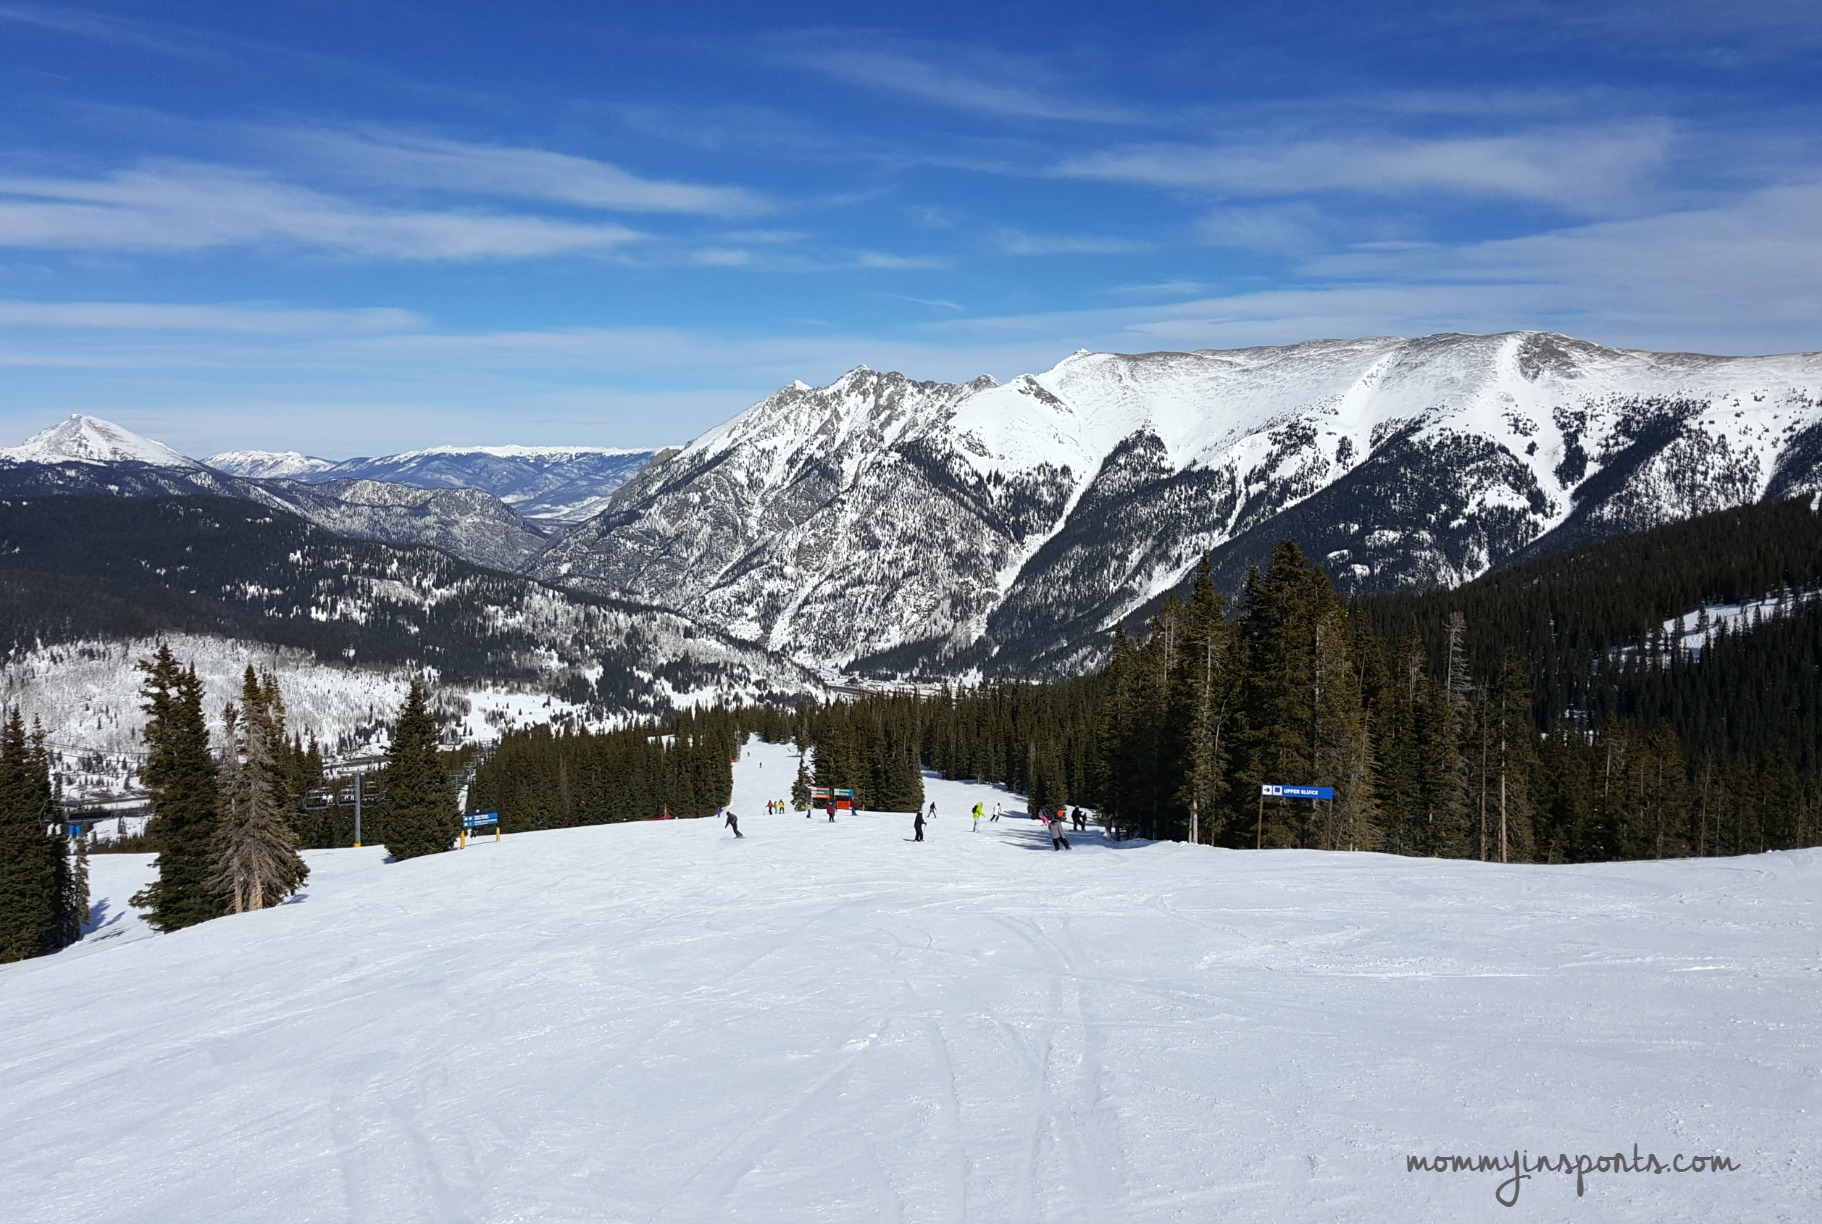 Looking for the perfect family-friendly ski resort? We love Copper Mountain, perfect for all ages when you travel!